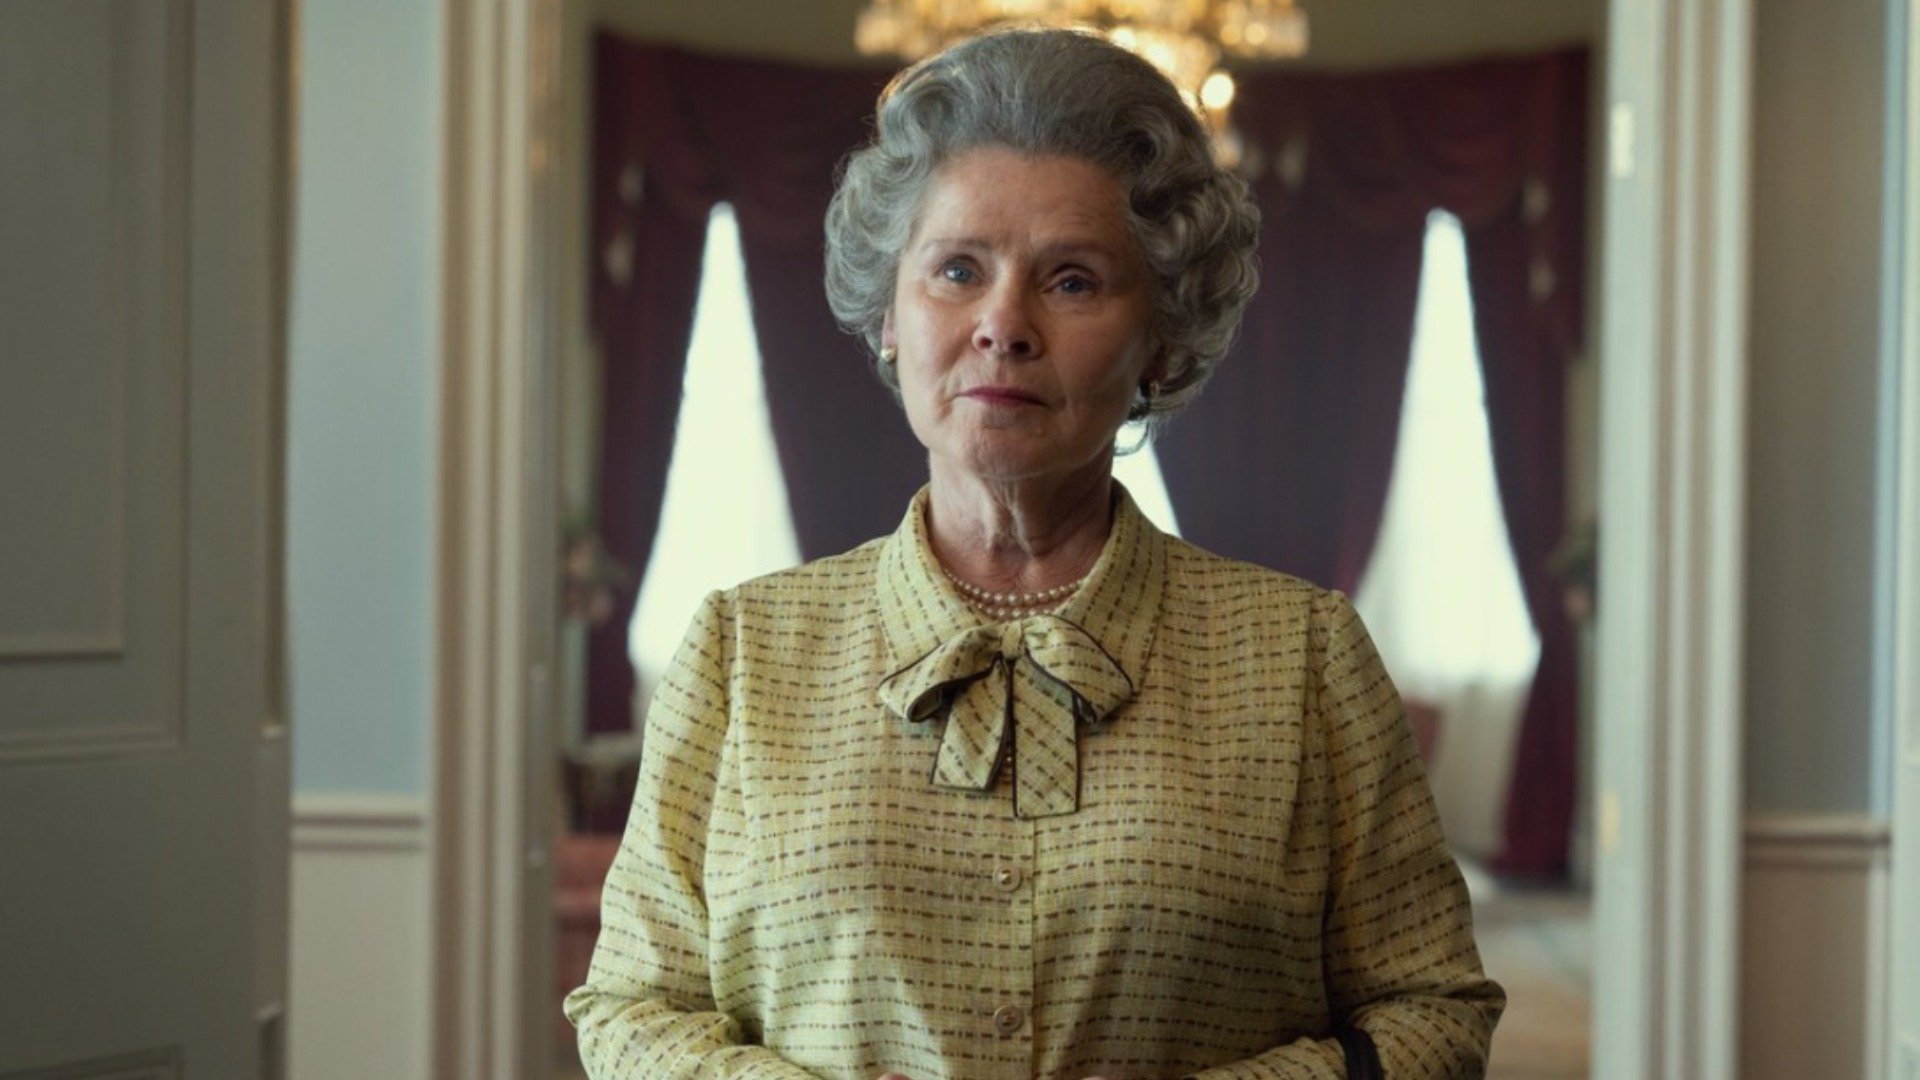 Best Shows to Watch After The Crown - Netflix Tudum